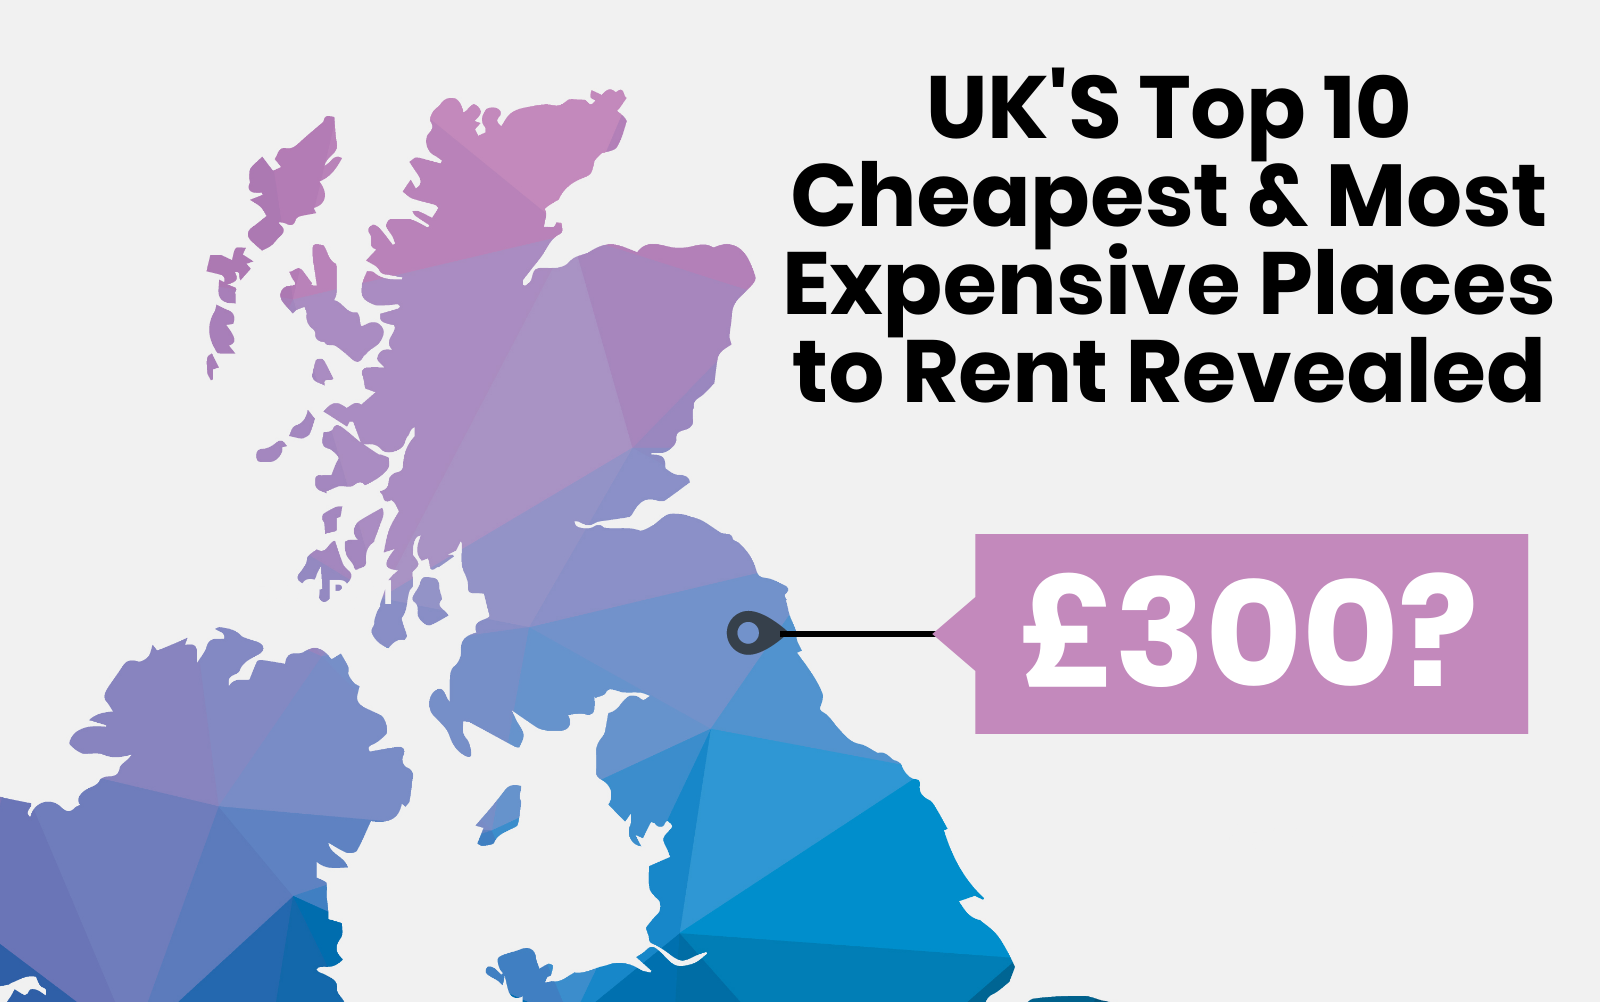 The top 10 cheapest and most expensive places to rent in the UK